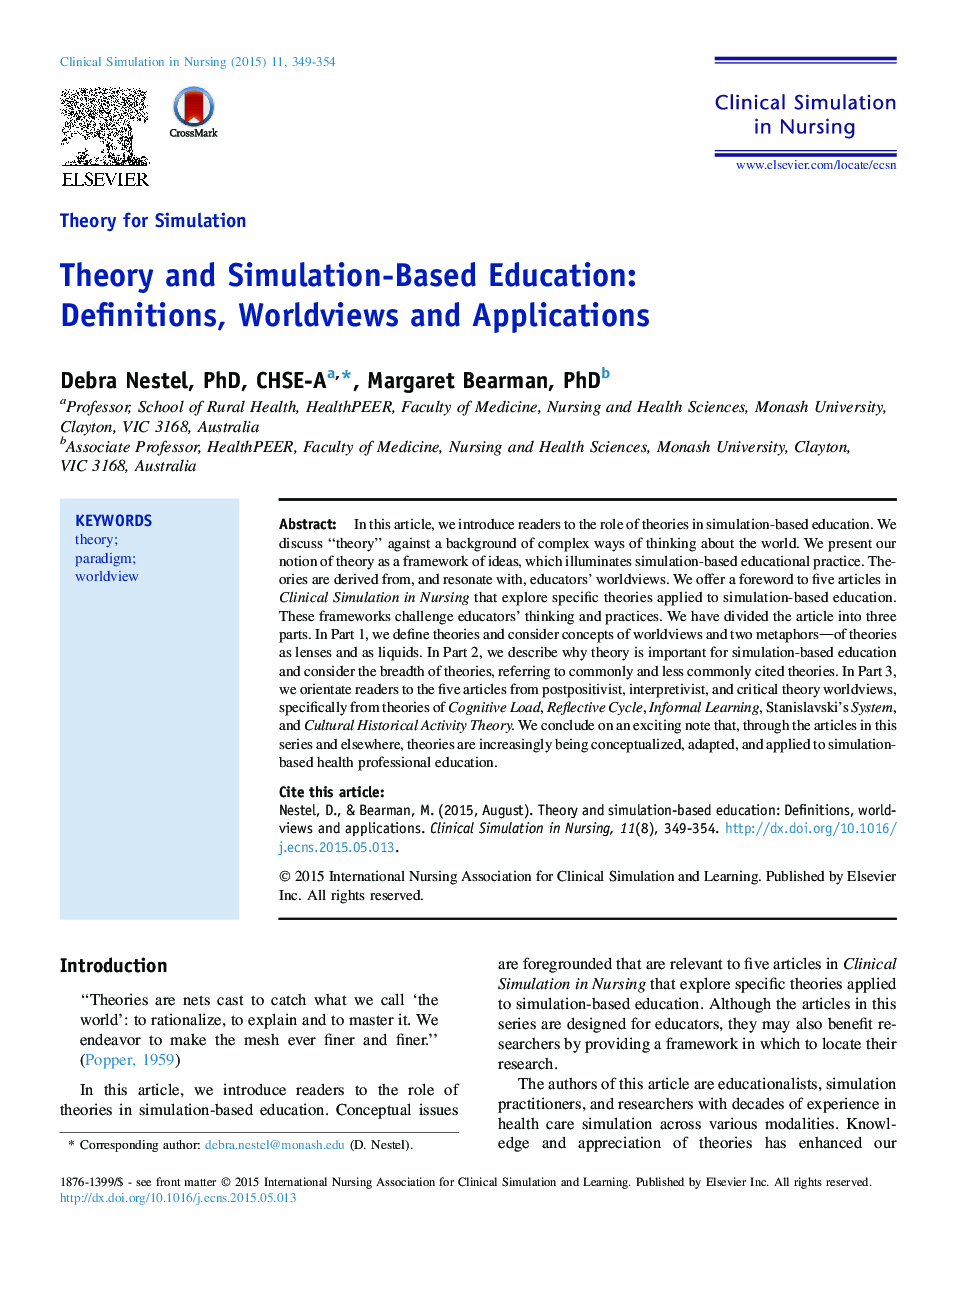 Theory for SimulationTheory and Simulation-Based Education: Definitions, Worldviews and Applications